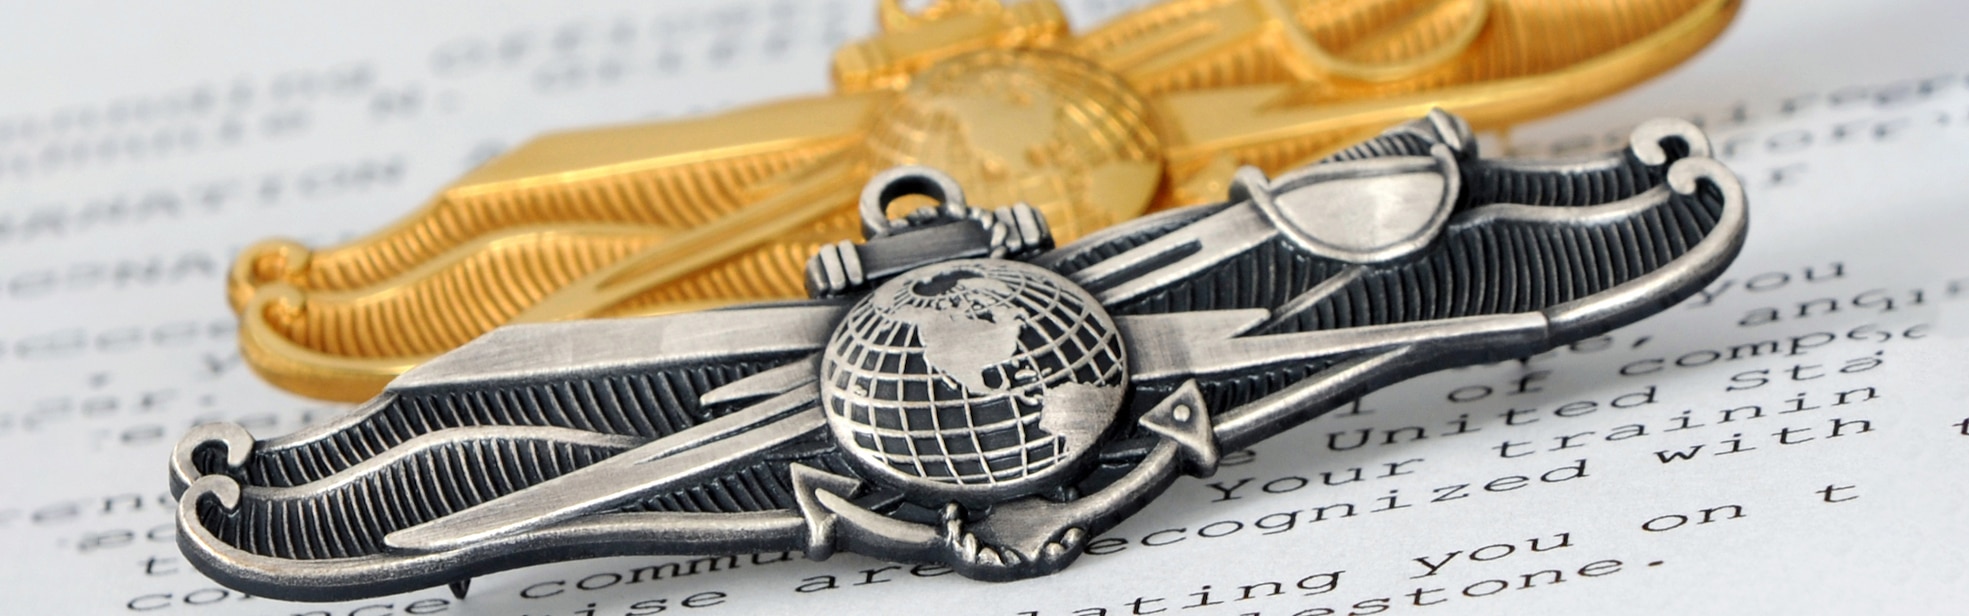 201019-N-5328N-003:  Officer’s Information Warfare Specialist (IWS) pin and the Enlisted IWS pin.  (U.S. Navy photo by Gary Nichols/Released) - photo was cropped to fit slide show & renamed201019-N-5328N-1003.